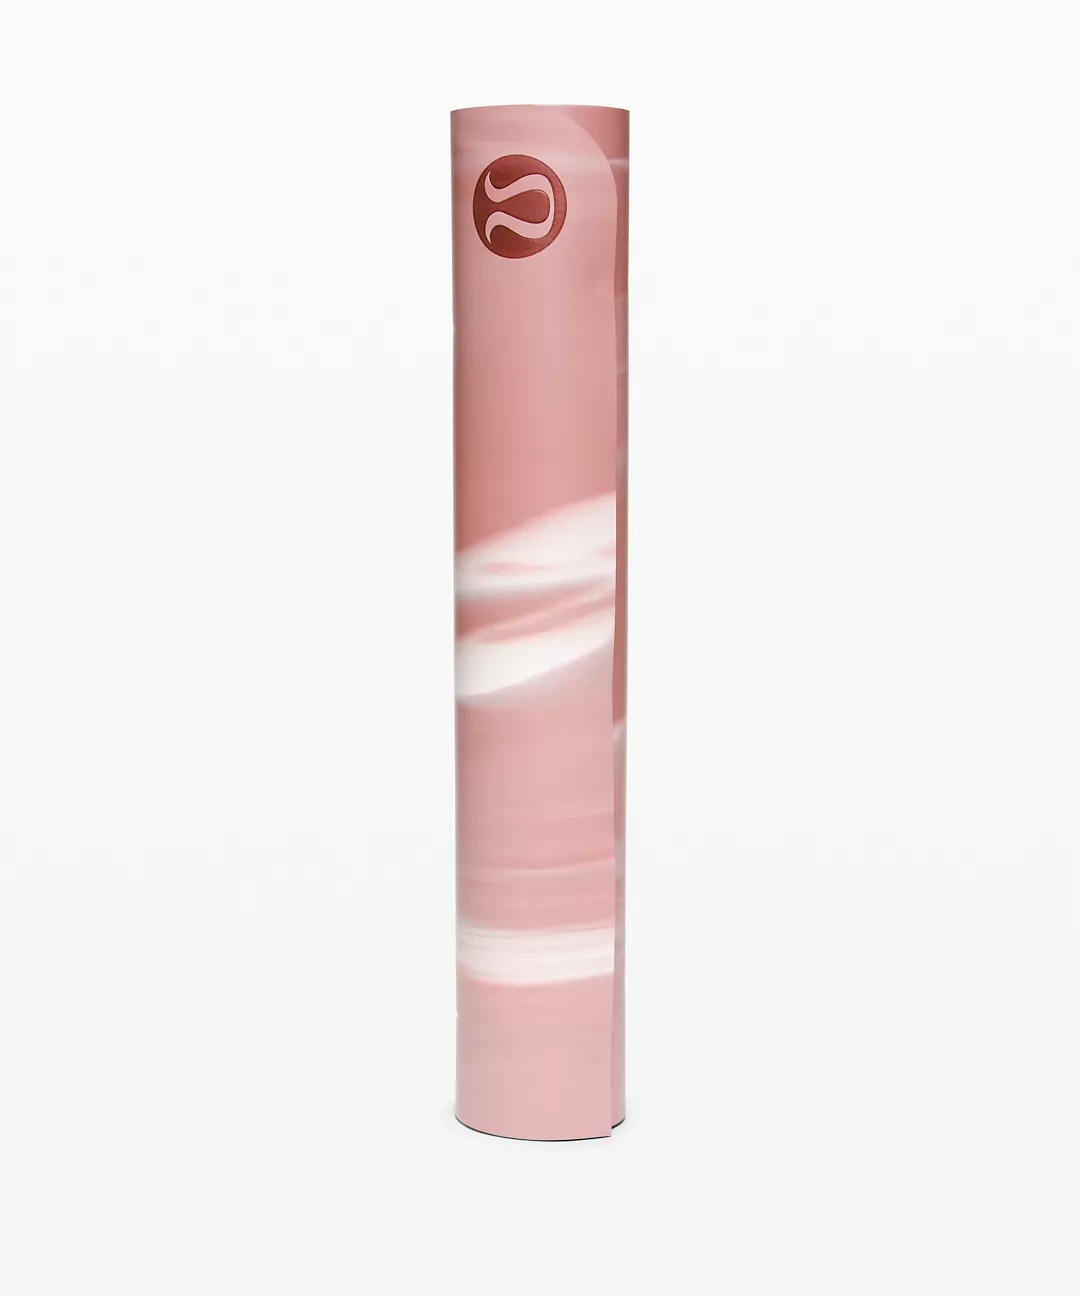 A pink yoga mat that doesn't absorb sweat and doesn't stain easily